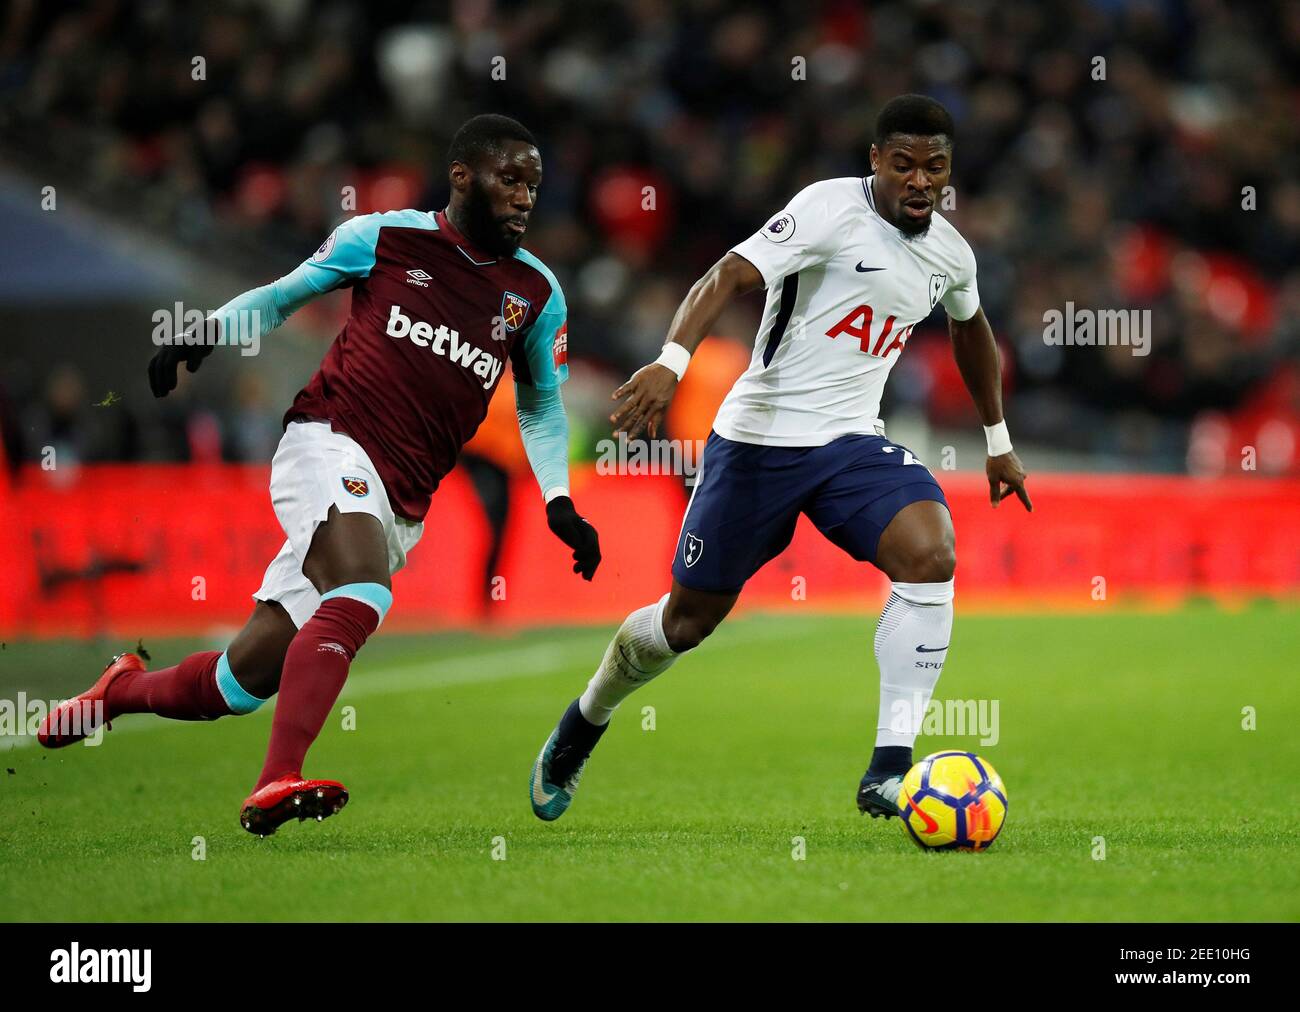 Soccer Football - Premier League - Tottenham Hotspur vs West Ham United - Wembley Stadium, London, Britain - January 4, 2018   West Ham United's Arthur Masuaku in action with Tottenham's Serge Aurier   REUTERS/Eddie Keogh    EDITORIAL USE ONLY. No use with unauthorized audio, video, data, fixture lists, club/league logos or 'live' services. Online in-match use limited to 75 images, no video emulation. No use in betting, games or single club/league/player publications.  Please contact your account representative for further details. Stock Photo